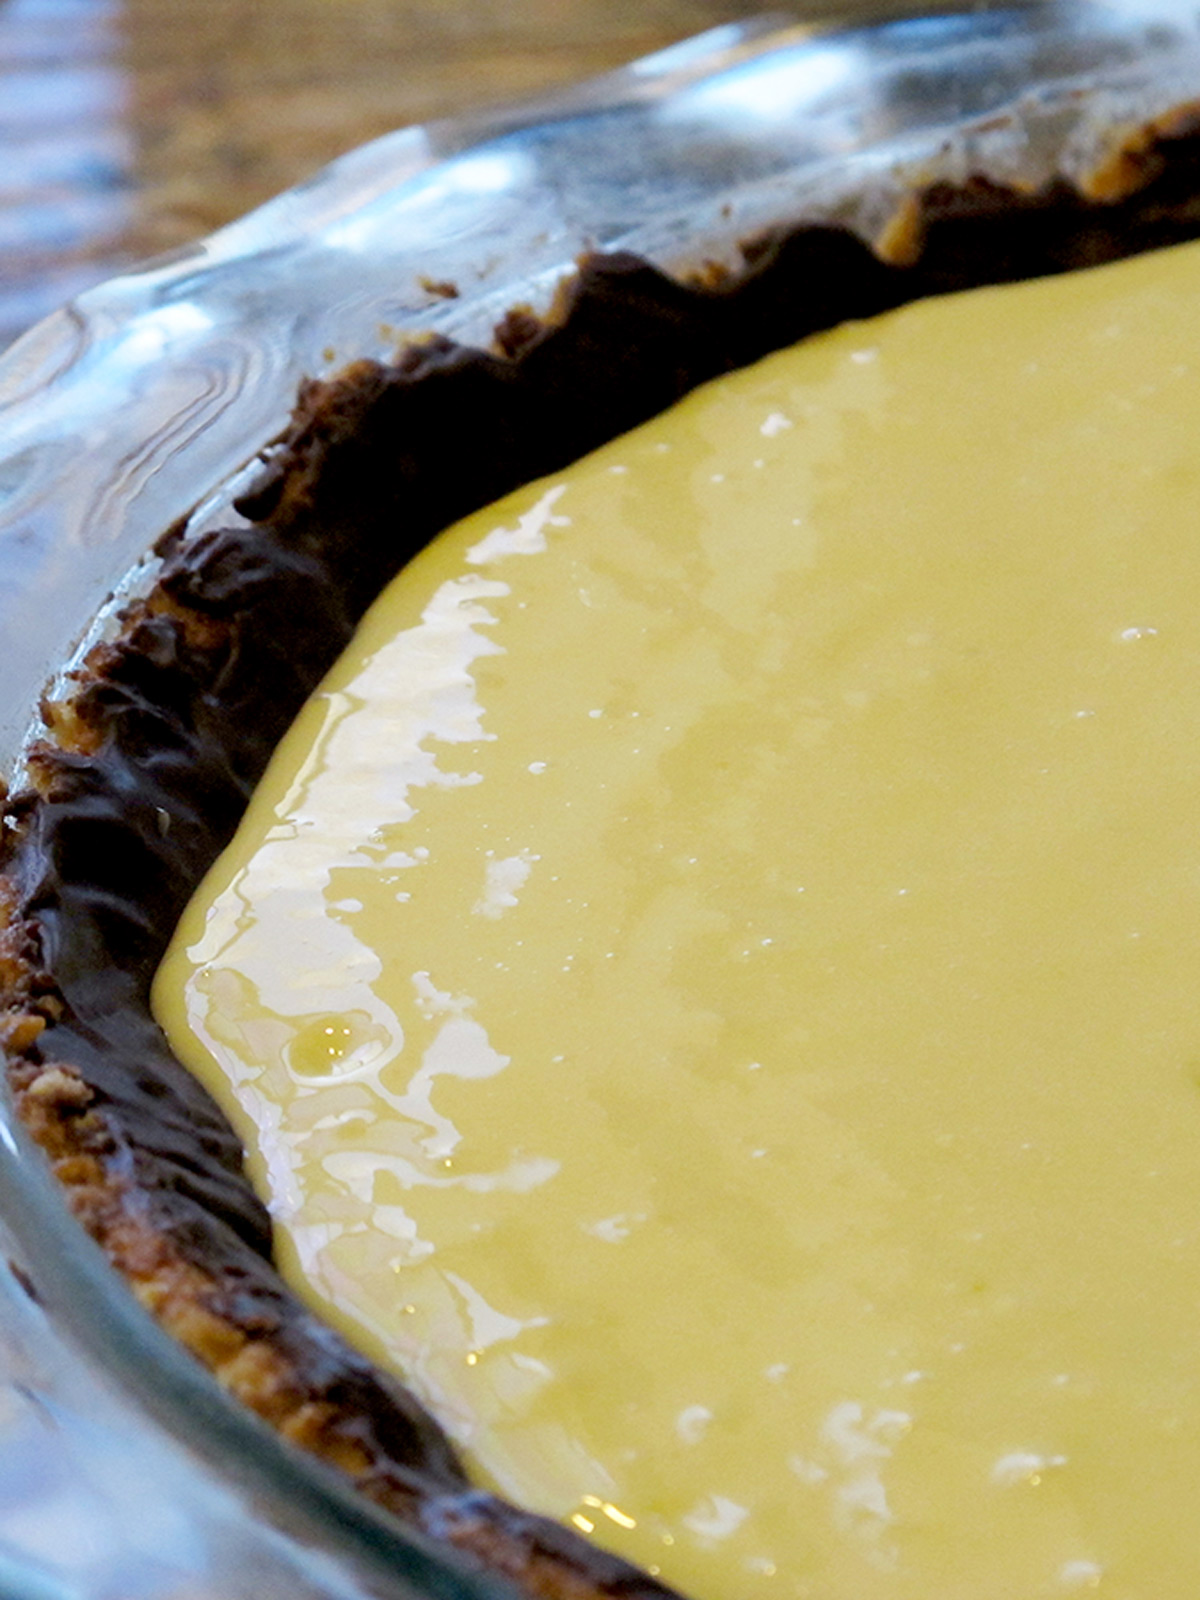 Unbaked key lime pie filling in the chocolate lined macadamia crust.